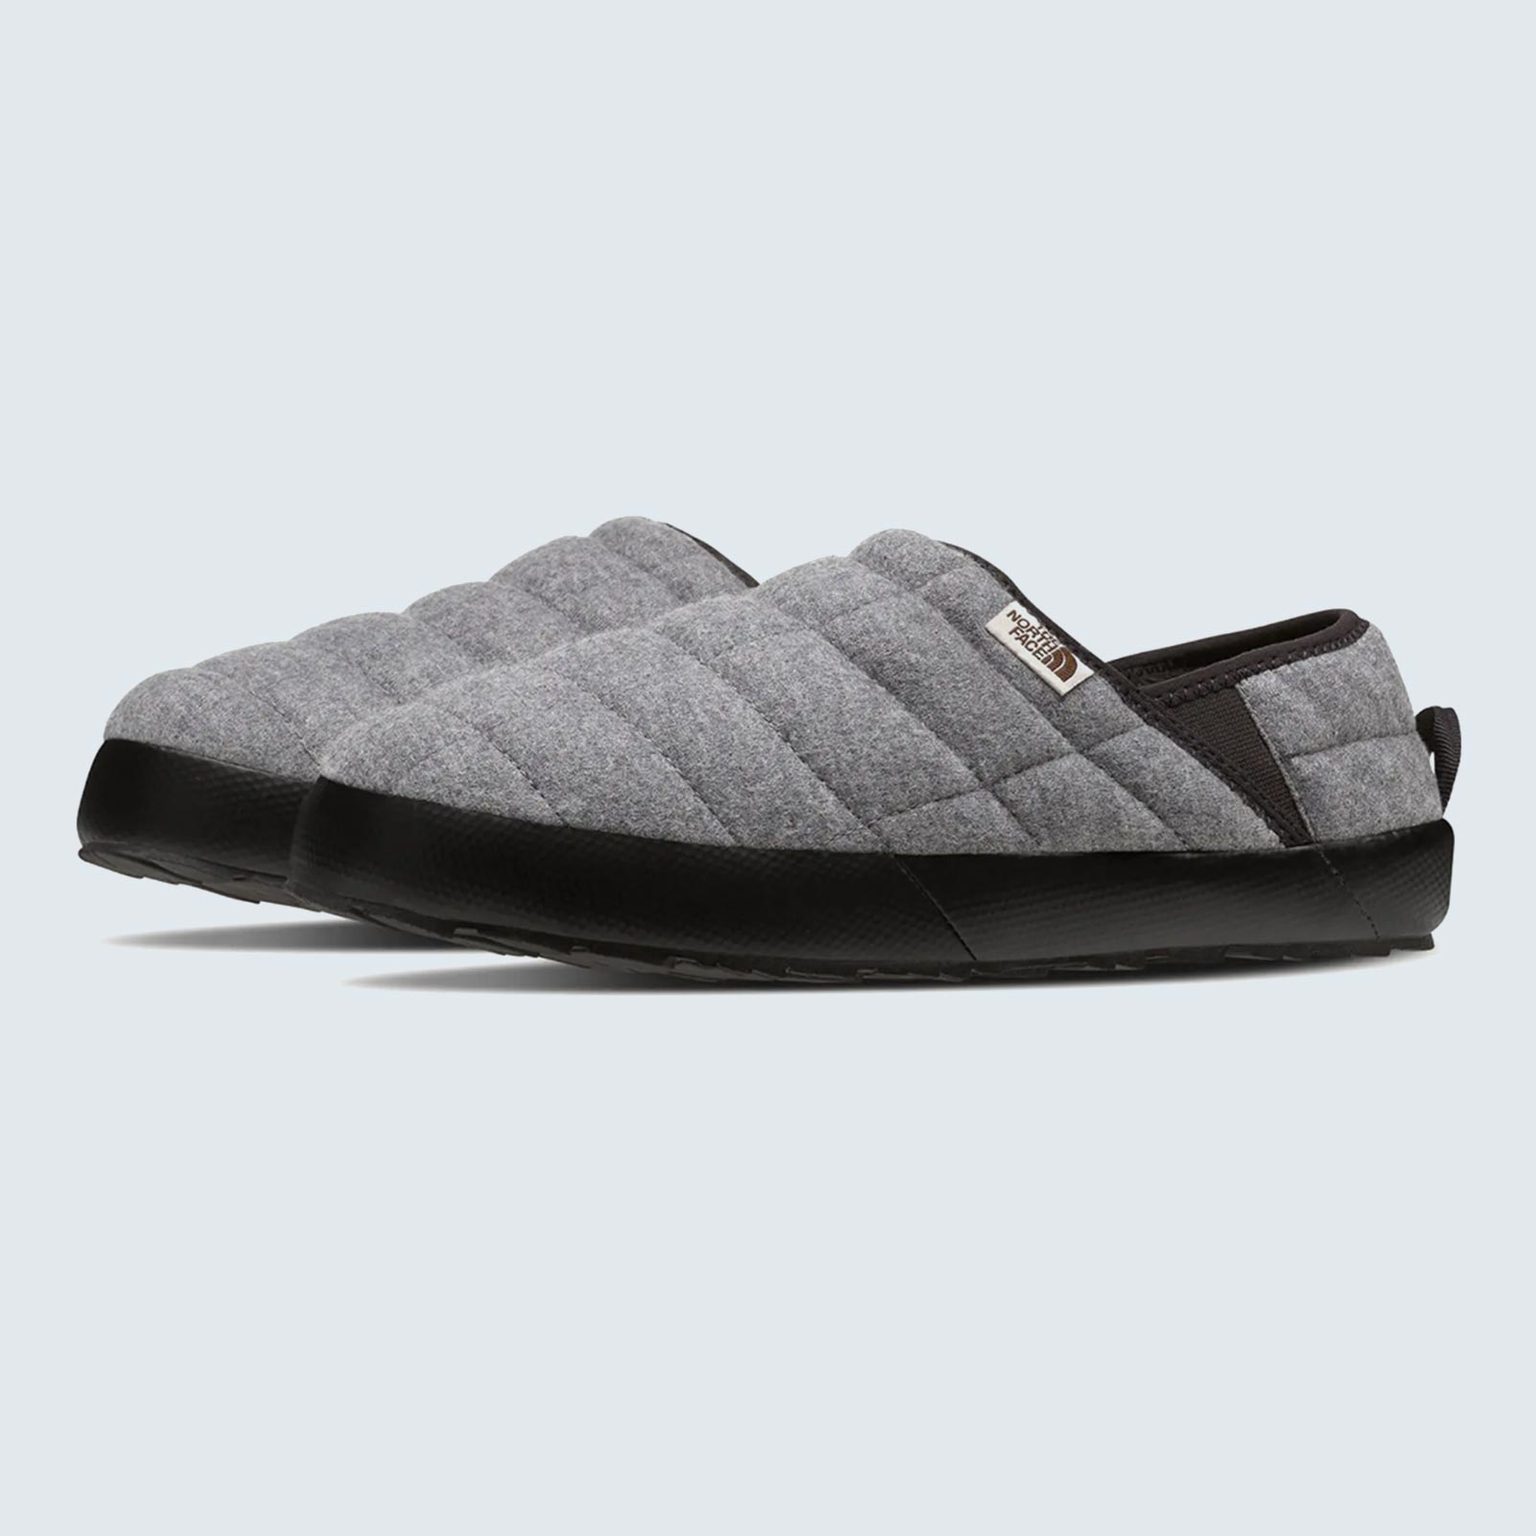 Best Men's Slippers 2023 | Comfy Men's Slippers for the House and More ...